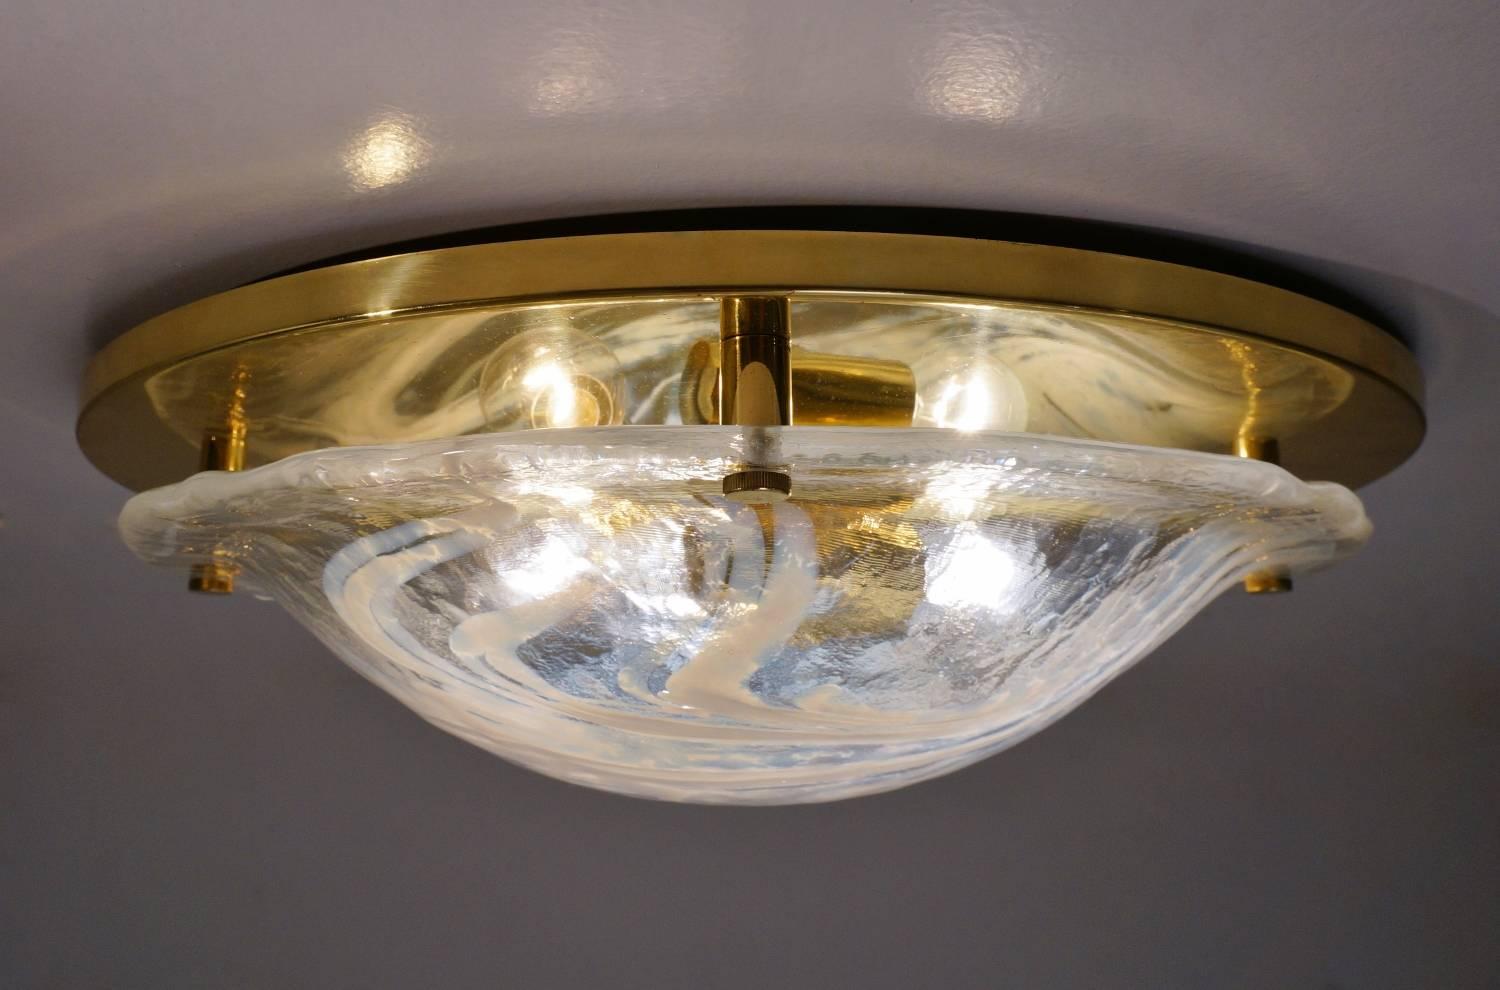 Murano art glass large flush light with a solid brass base by Hillebrand Lighting, circa 1970s, German. The brass base is finished with an elegant polished effect.

Thoroughly cleaned respecting the vintage patina. Newly rewired, earthed, in full